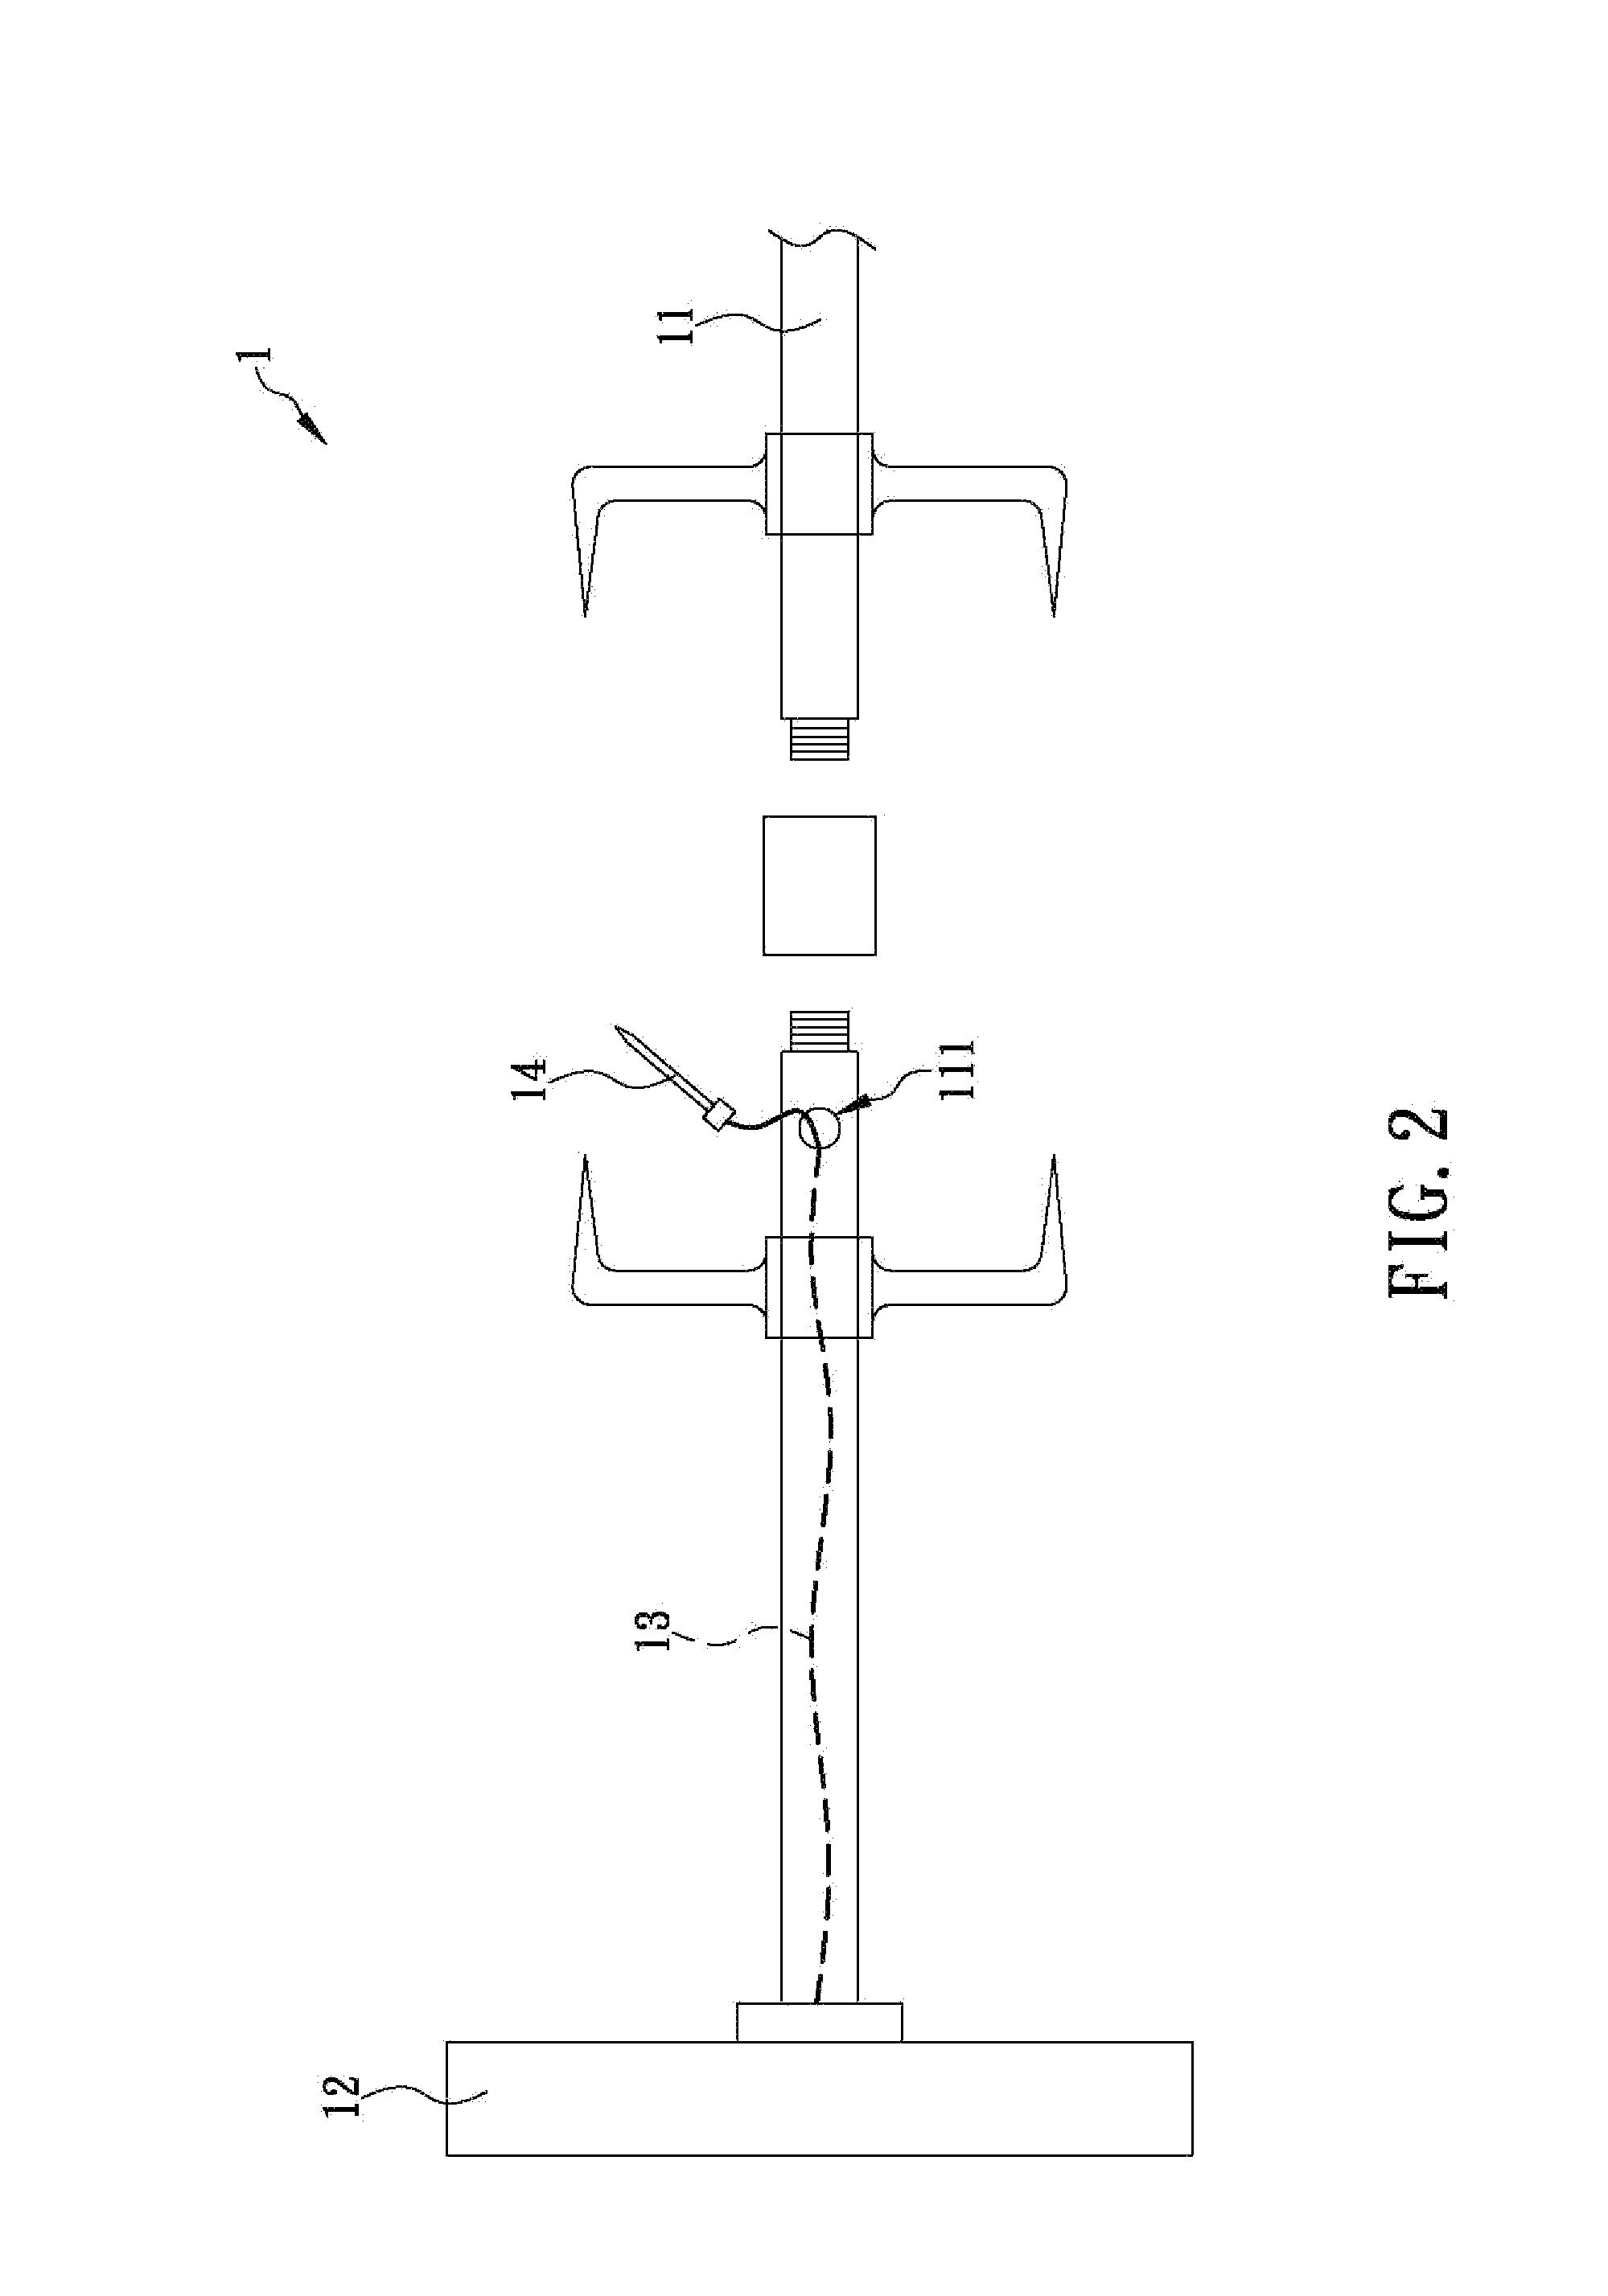 Barbecue spit with temperature probe